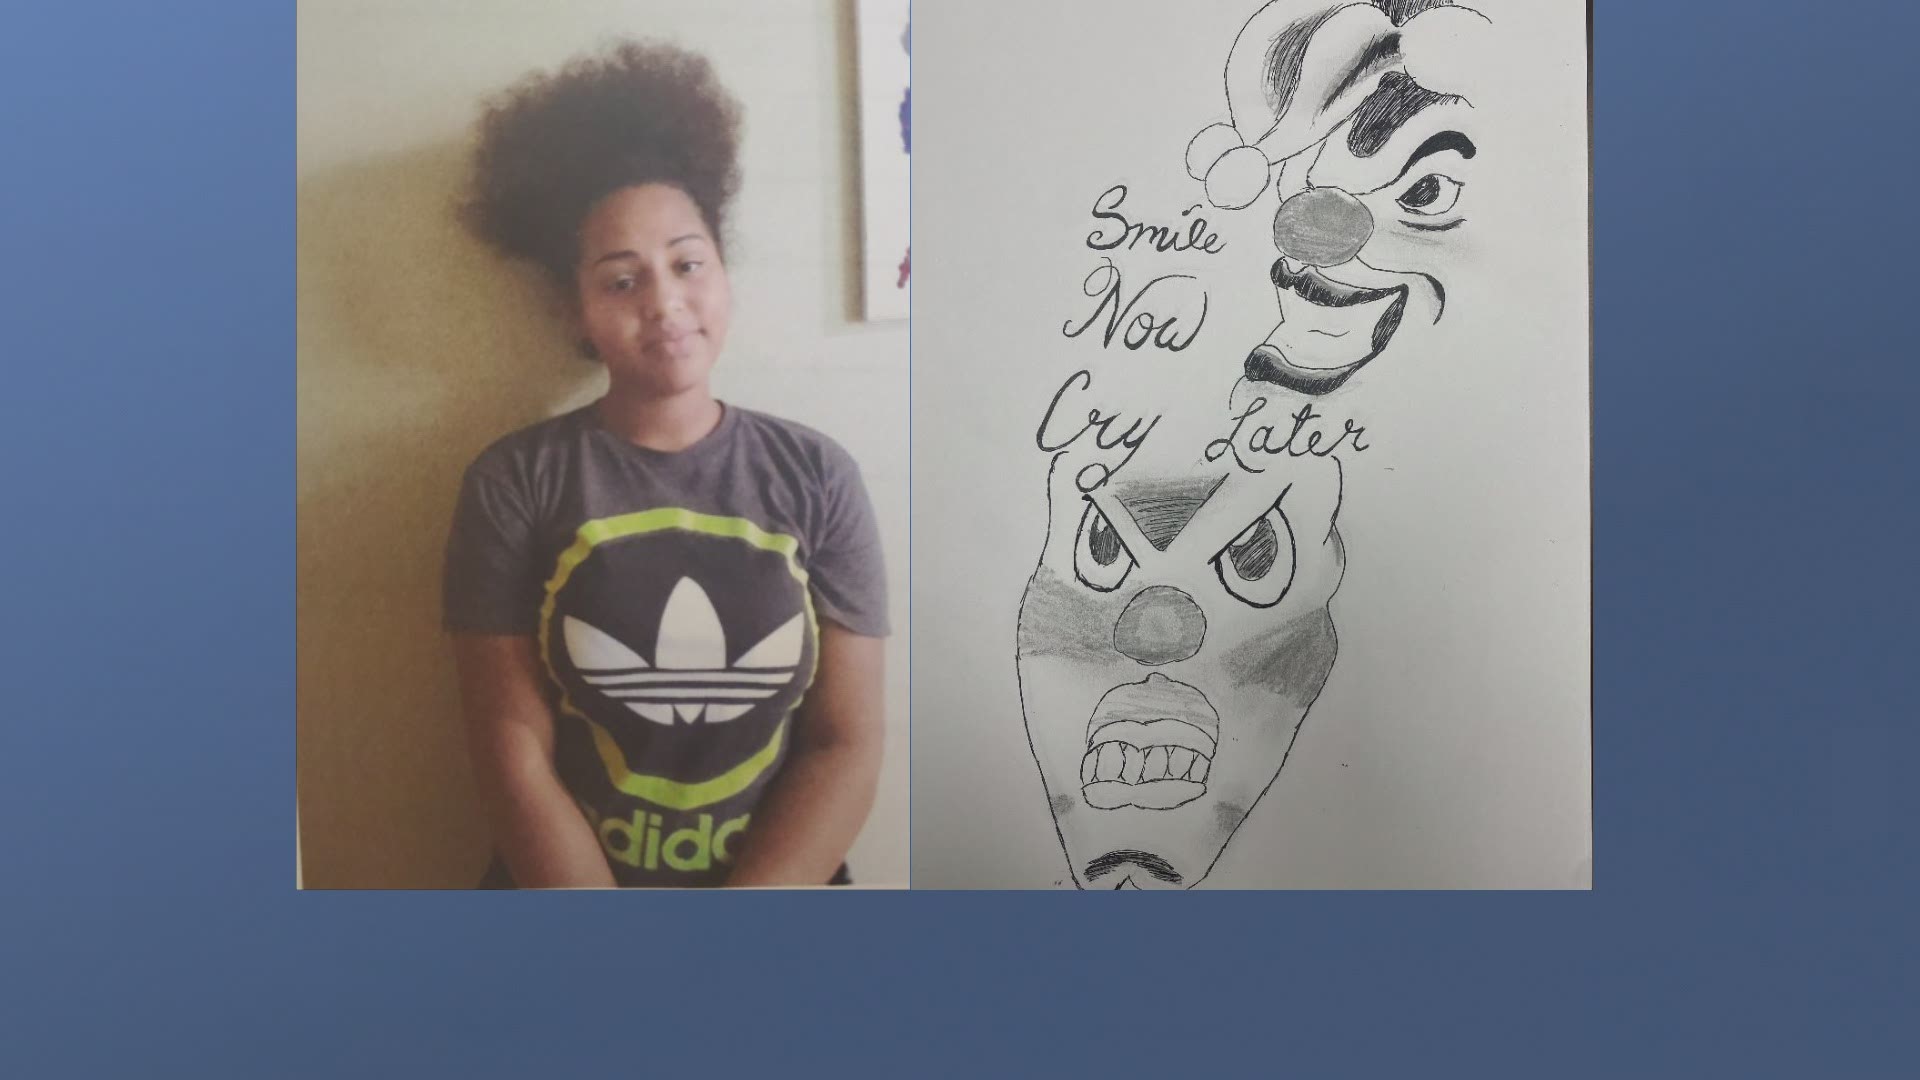 The body of a teenager was found in Ponchatoula after she had run away in February 2020.